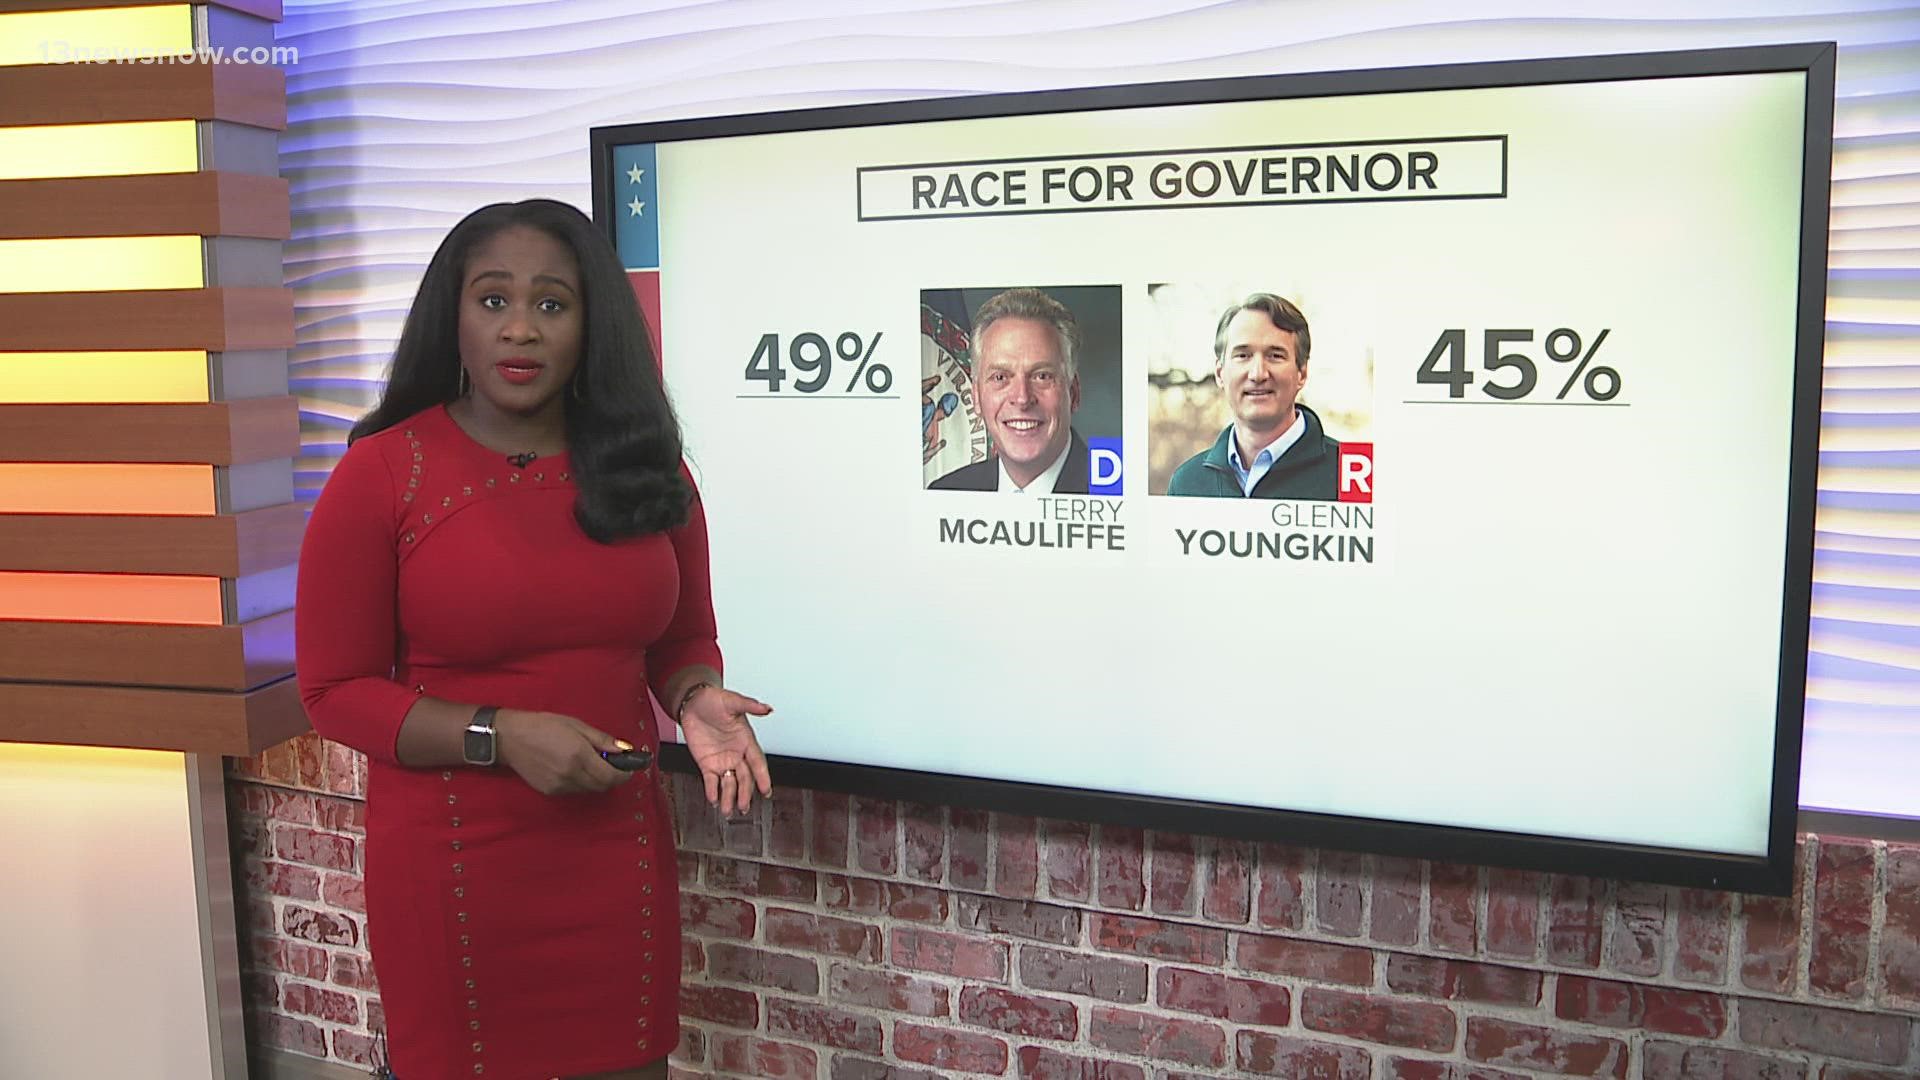 CNU's poll shows that former Democratic Gov. Terry McAuliffe's lead against Republican Glenn Youngkin is shrinking.